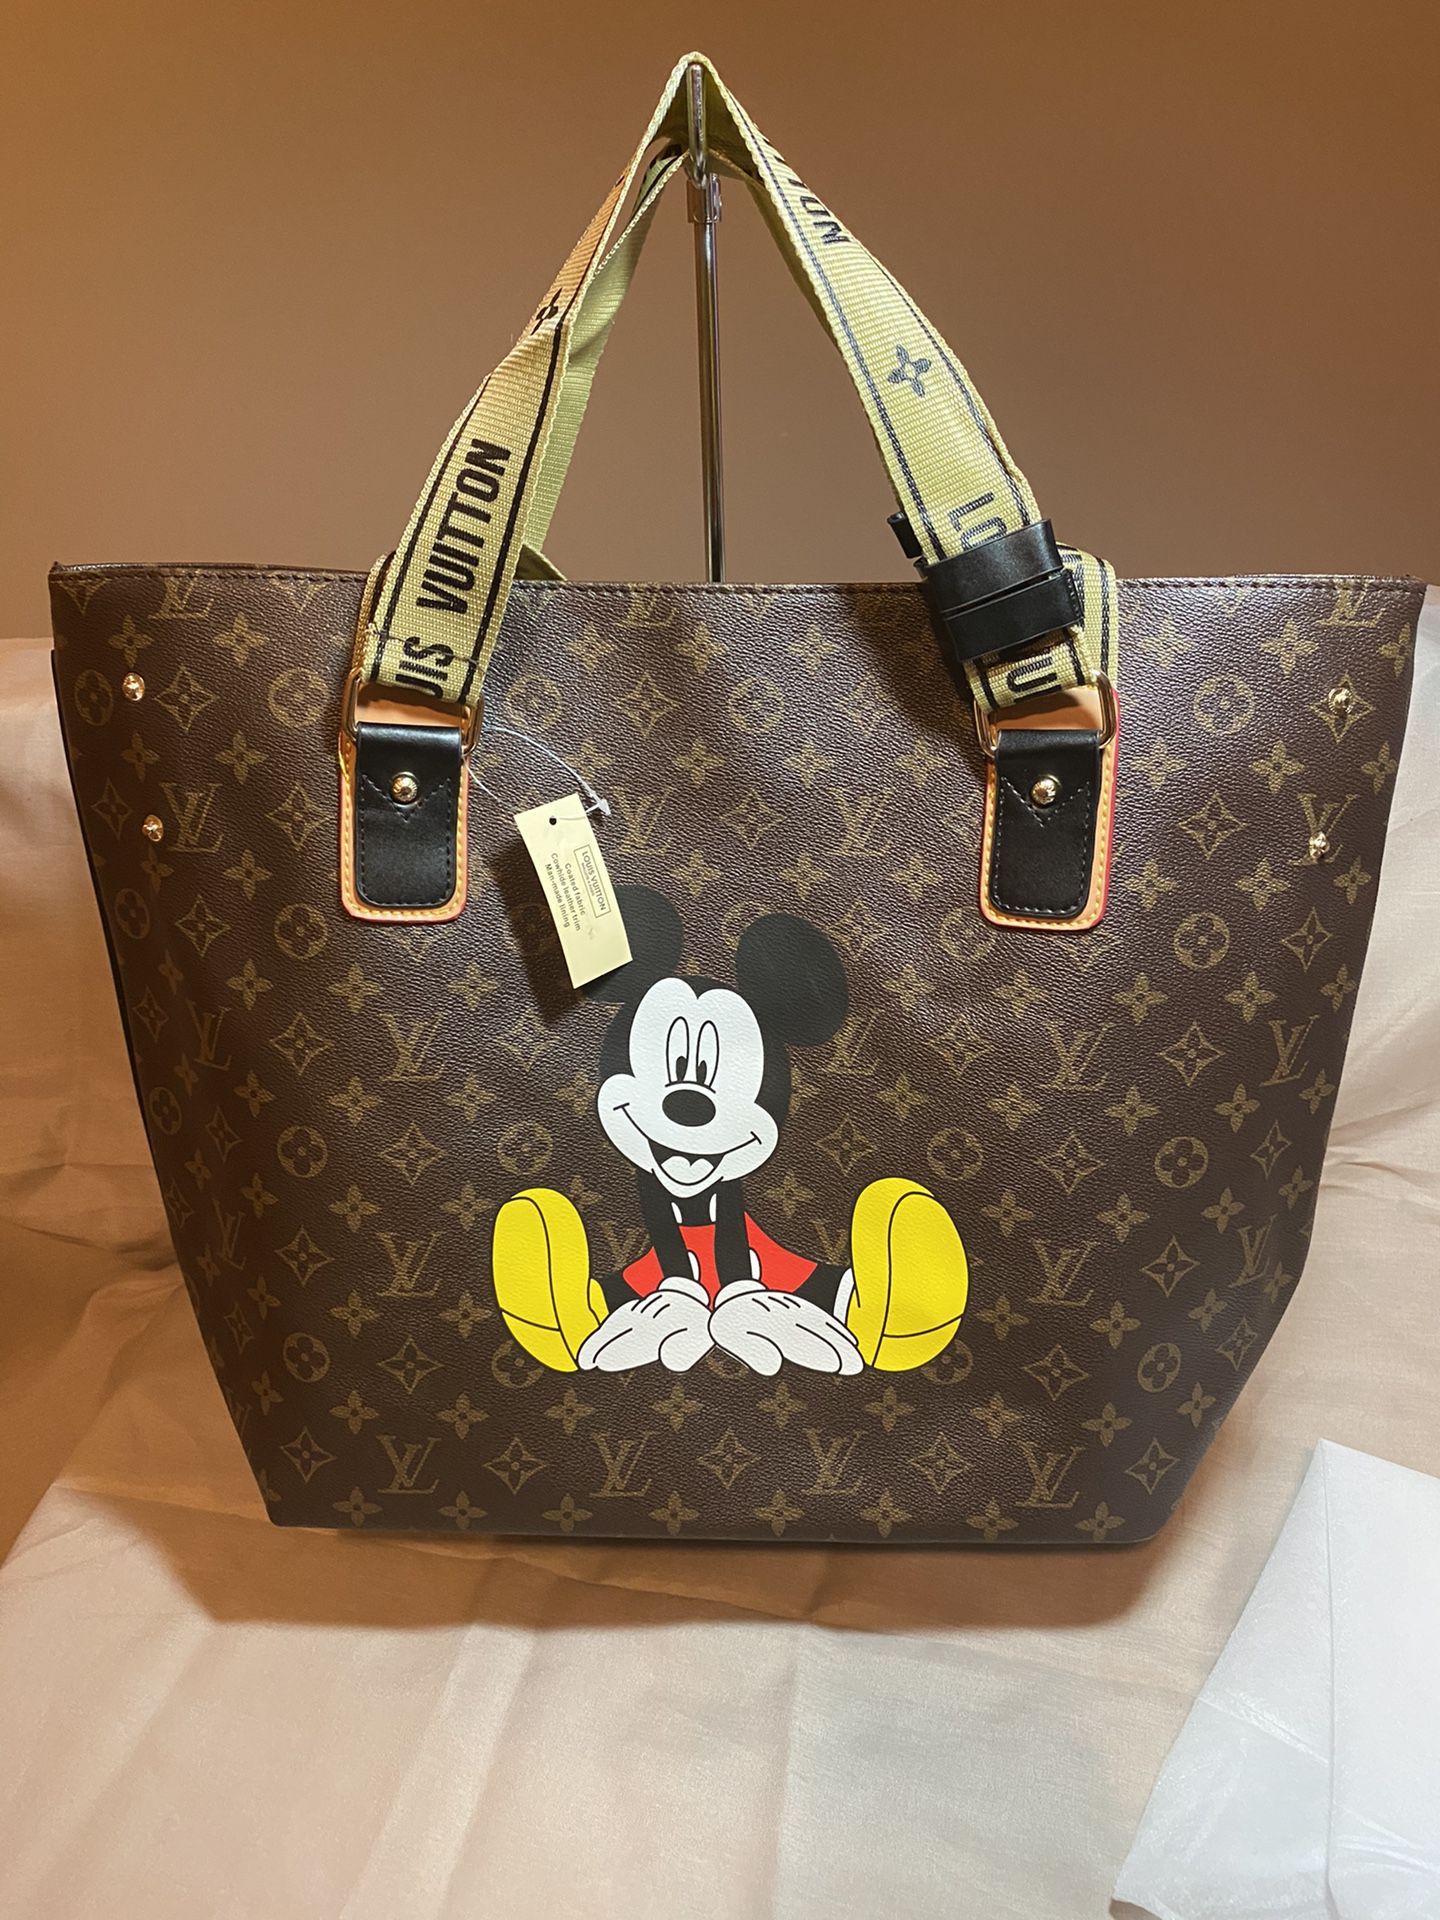 New Bags $75